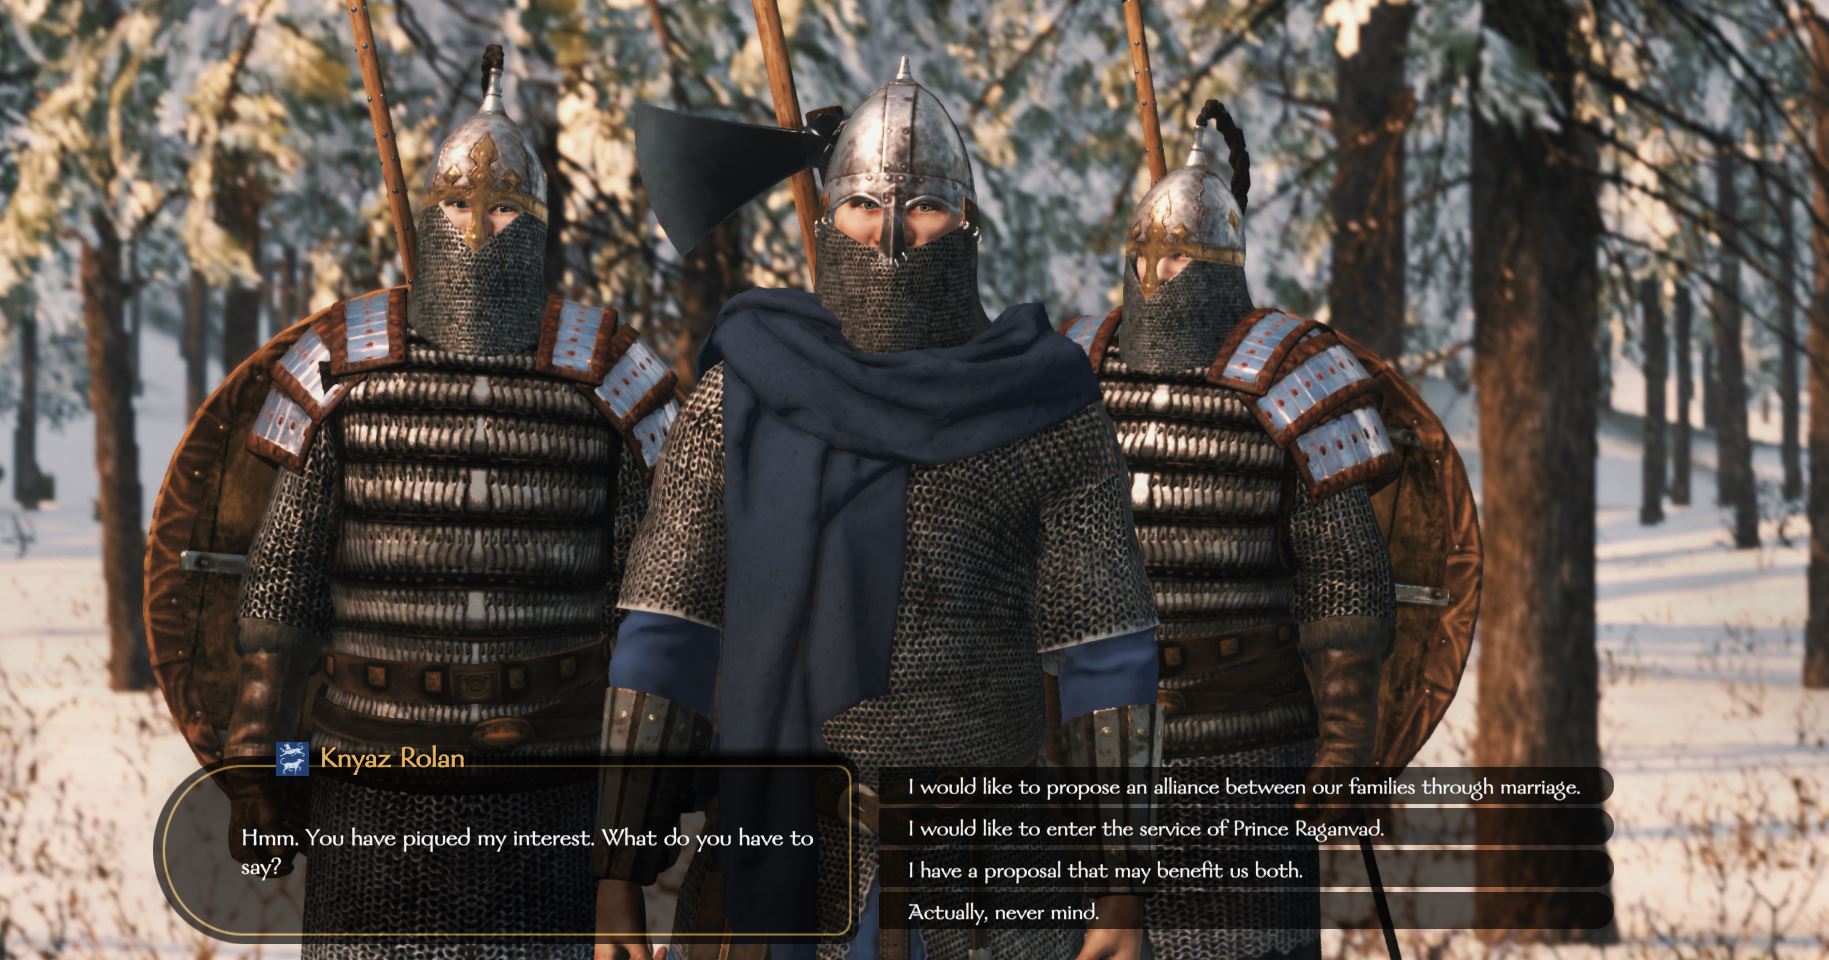 How To Marry Off Family Members - Bannerlord